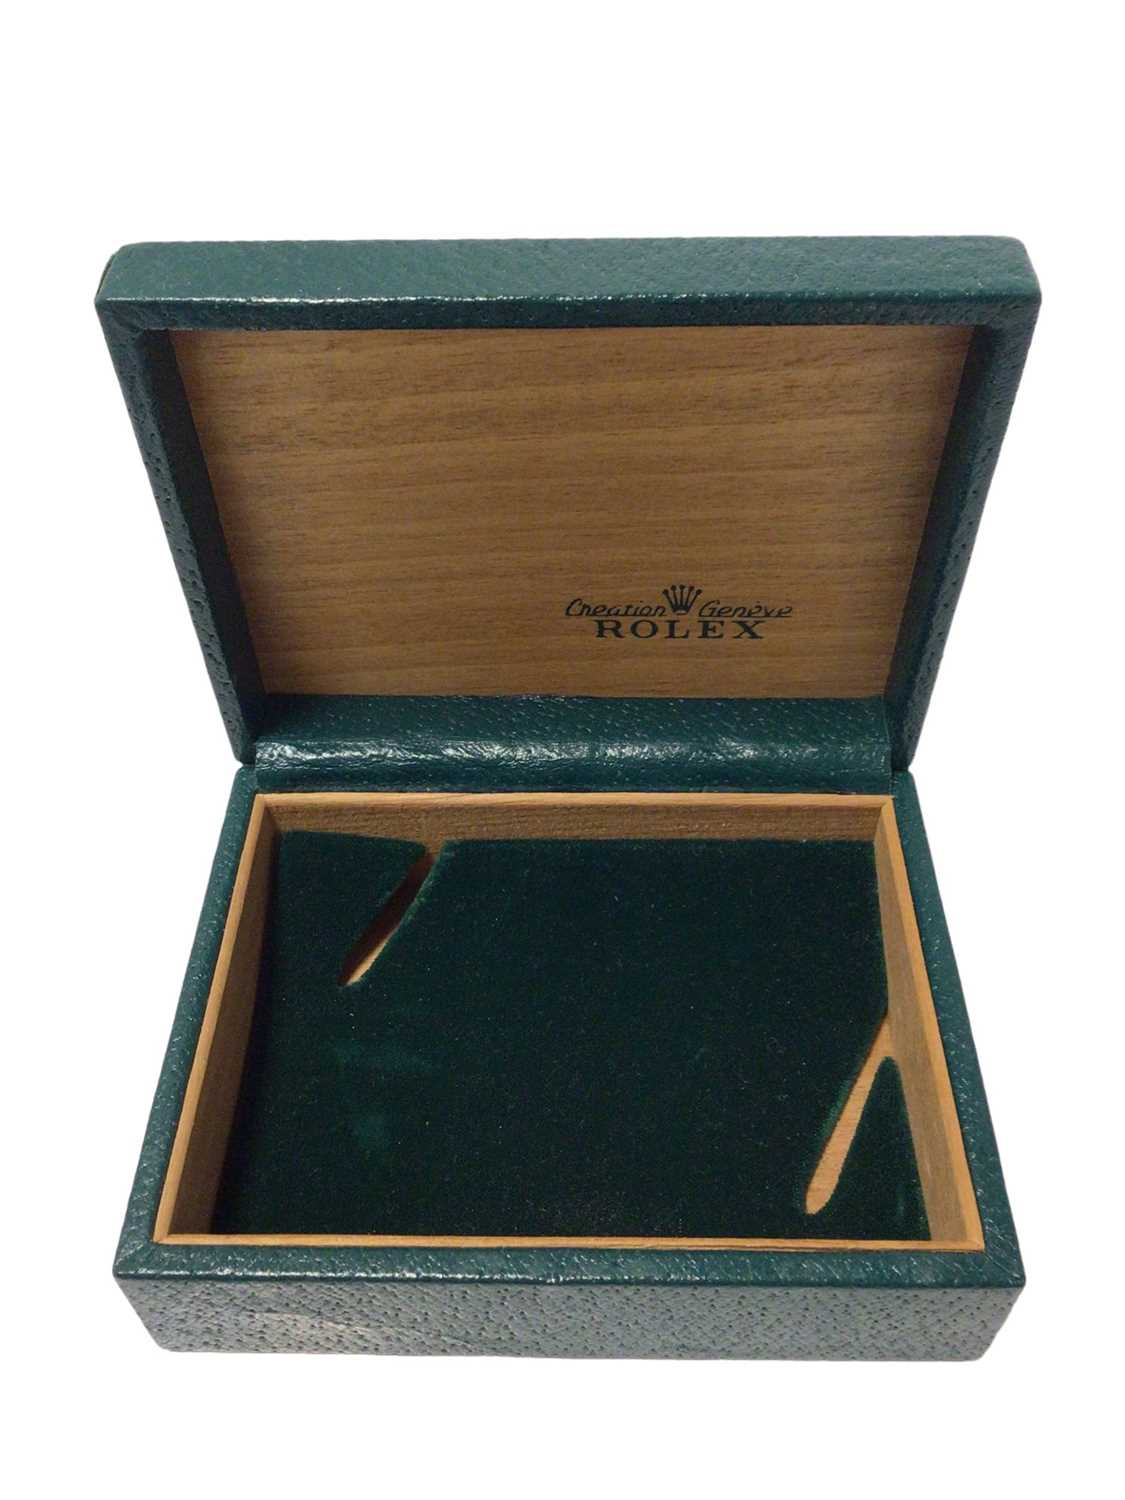 Rolex Oyster empty watch box and outer cardboard box - Image 4 of 7